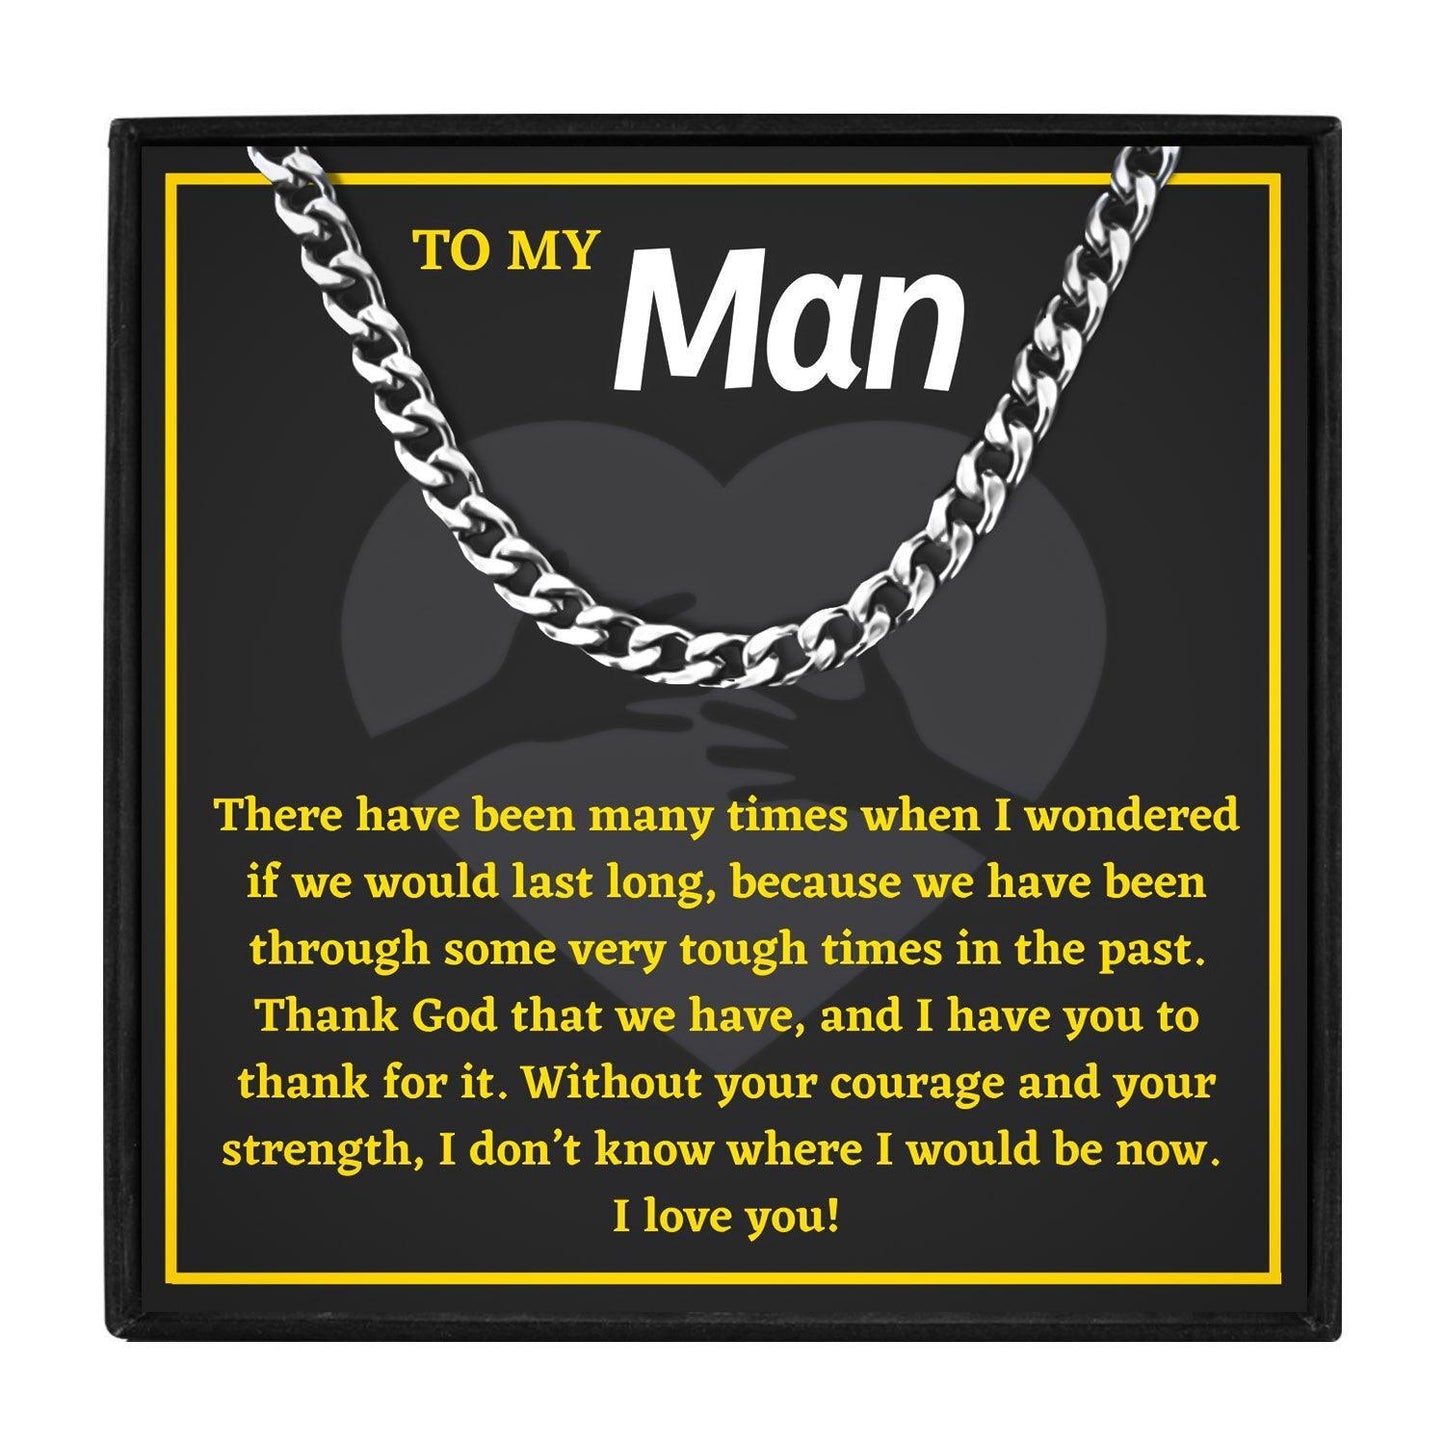 Gifts for Husband Gift Necklace From Wife for Christmas 2023 | Gifts for Husband Gift Necklace From Wife - undefined | husband gift ideas, My Husband Necklace, my man gift | From Hunny Life | hunnylife.com